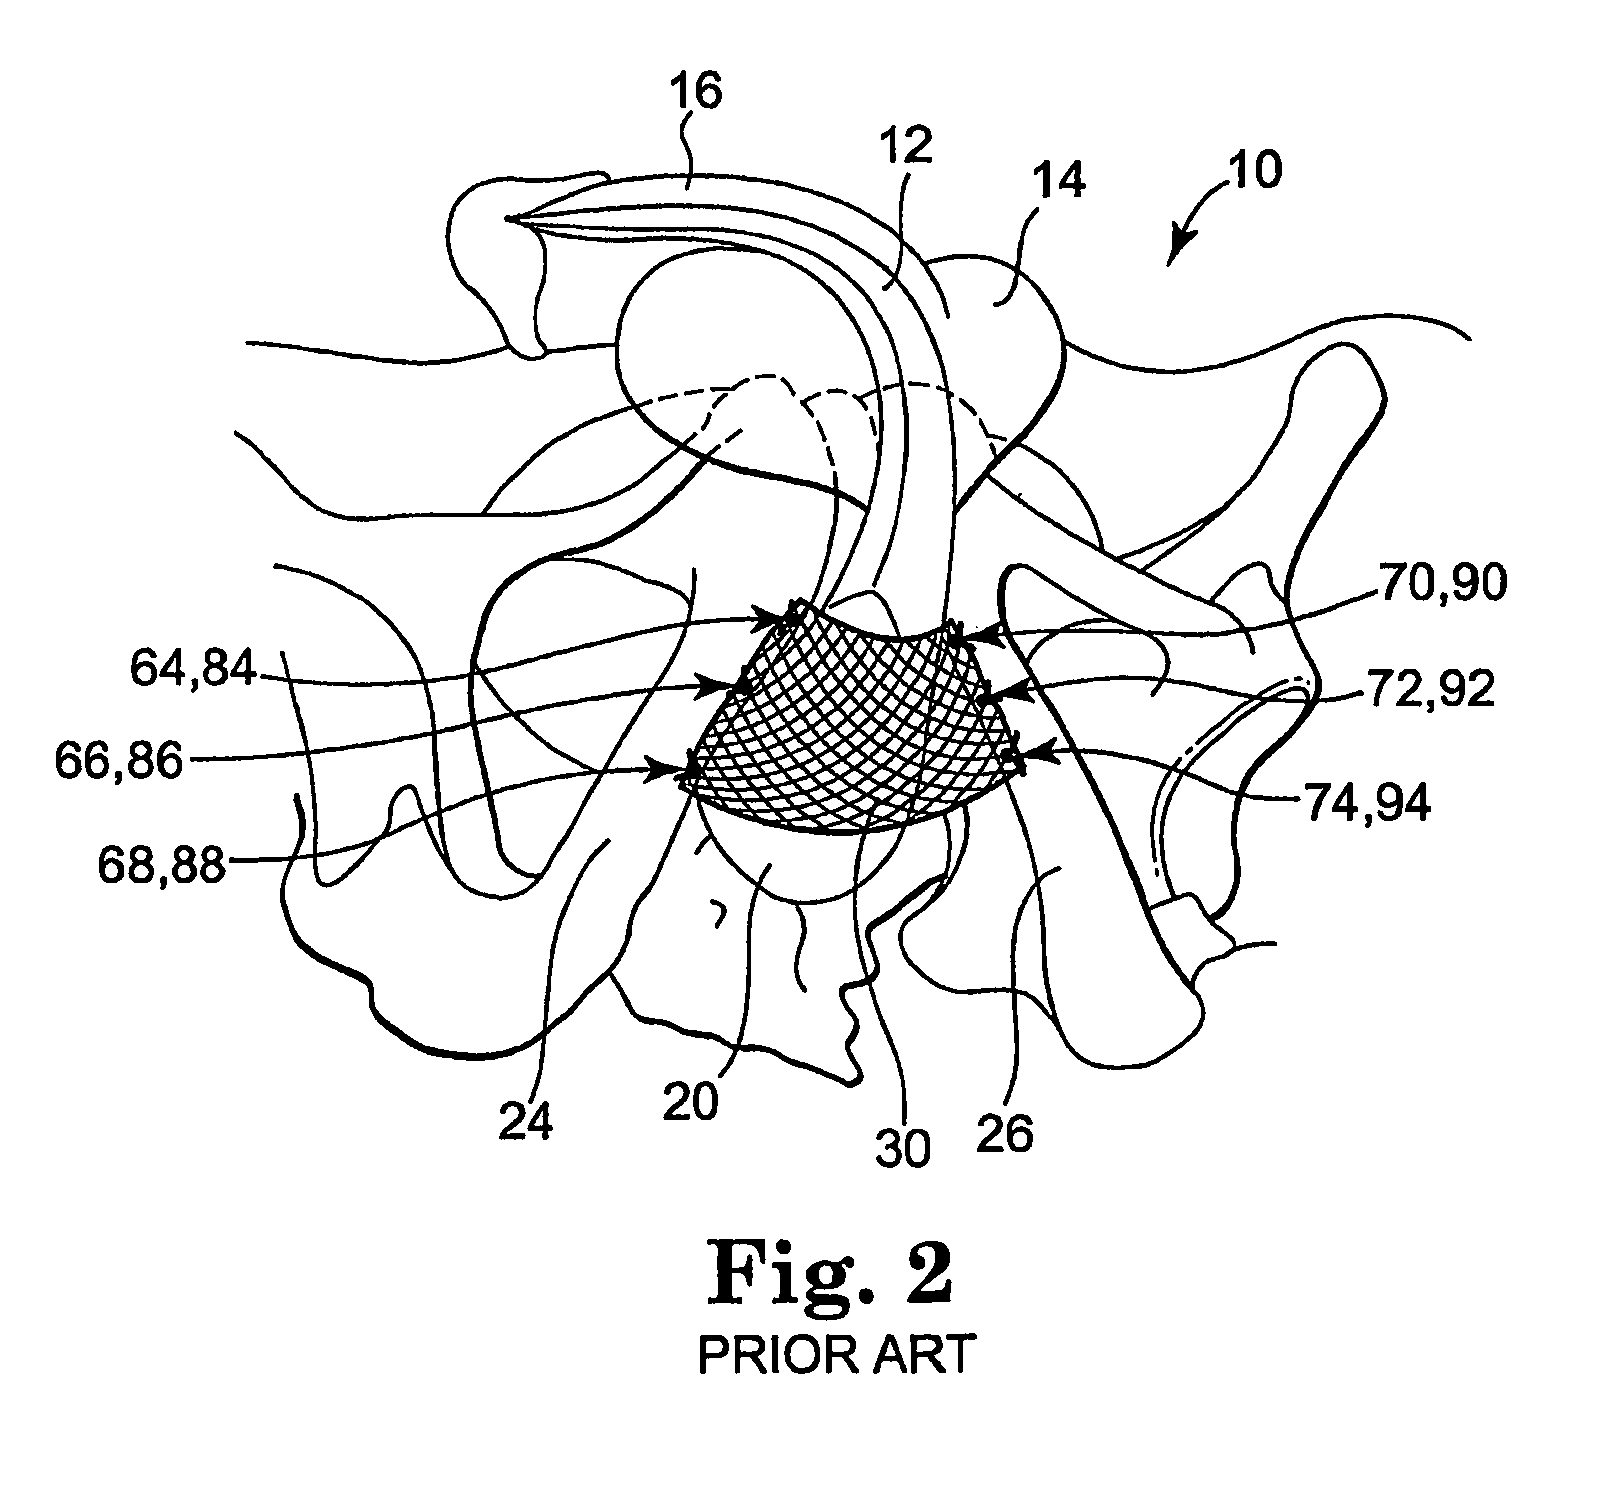 Methods and apparatus for securing a urethral sling to a pubic bone